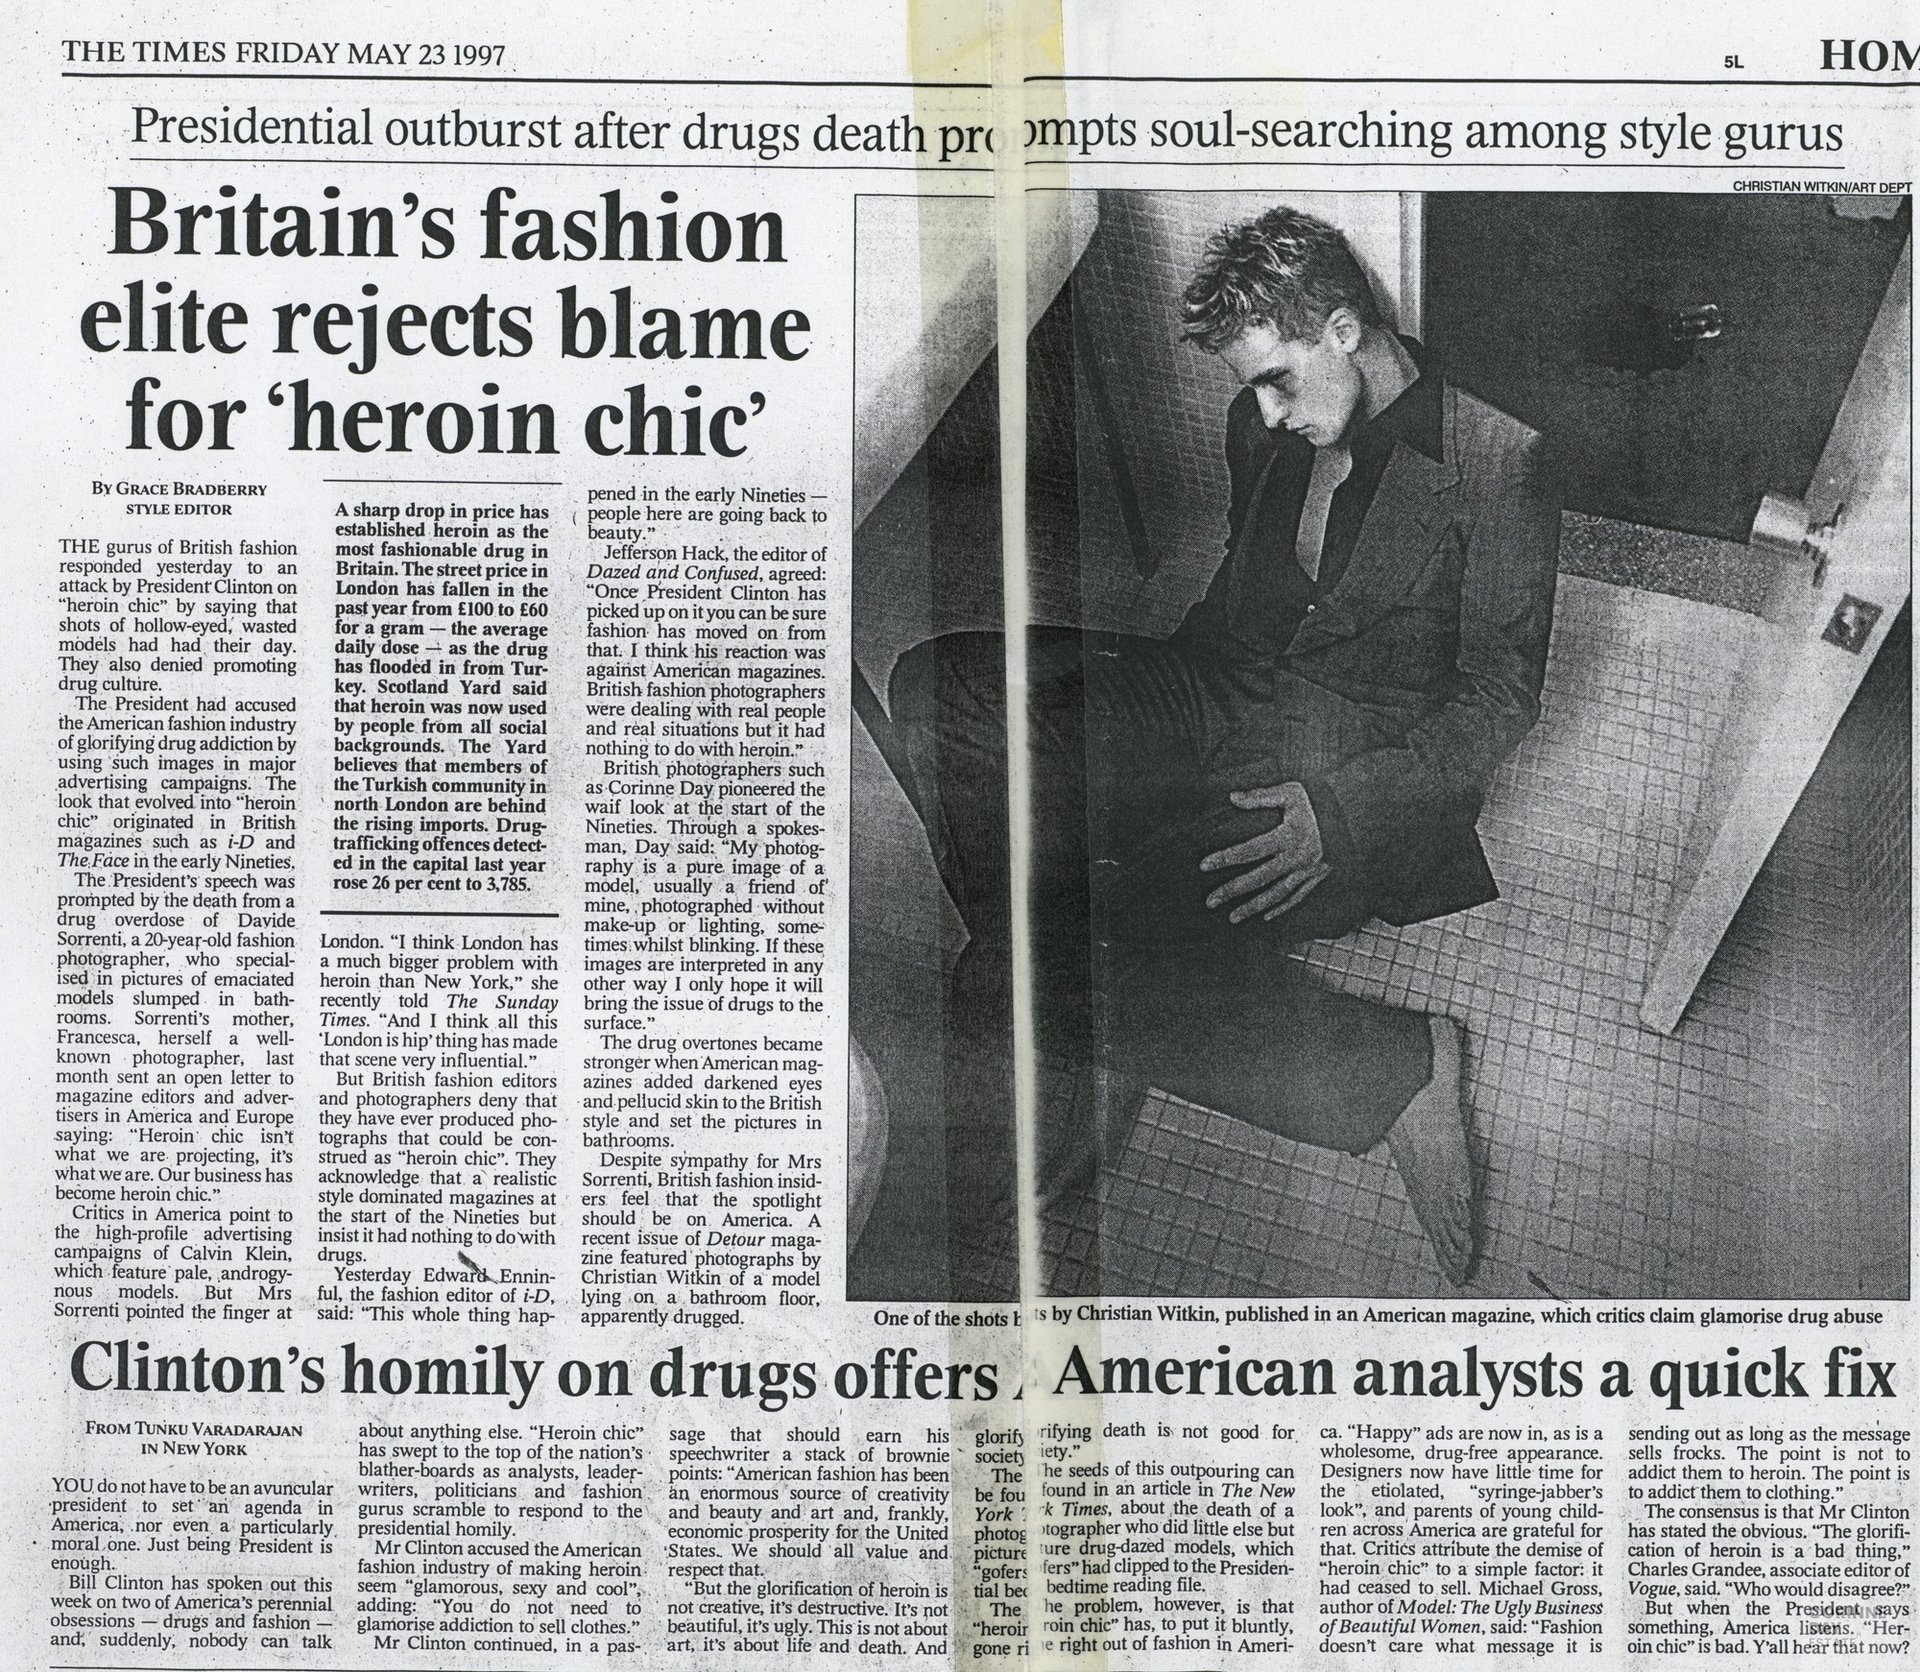 Britain's fashion elite rejects blame for 'heroin chic', The Times, 23 May 1997 — Image 1 of 1